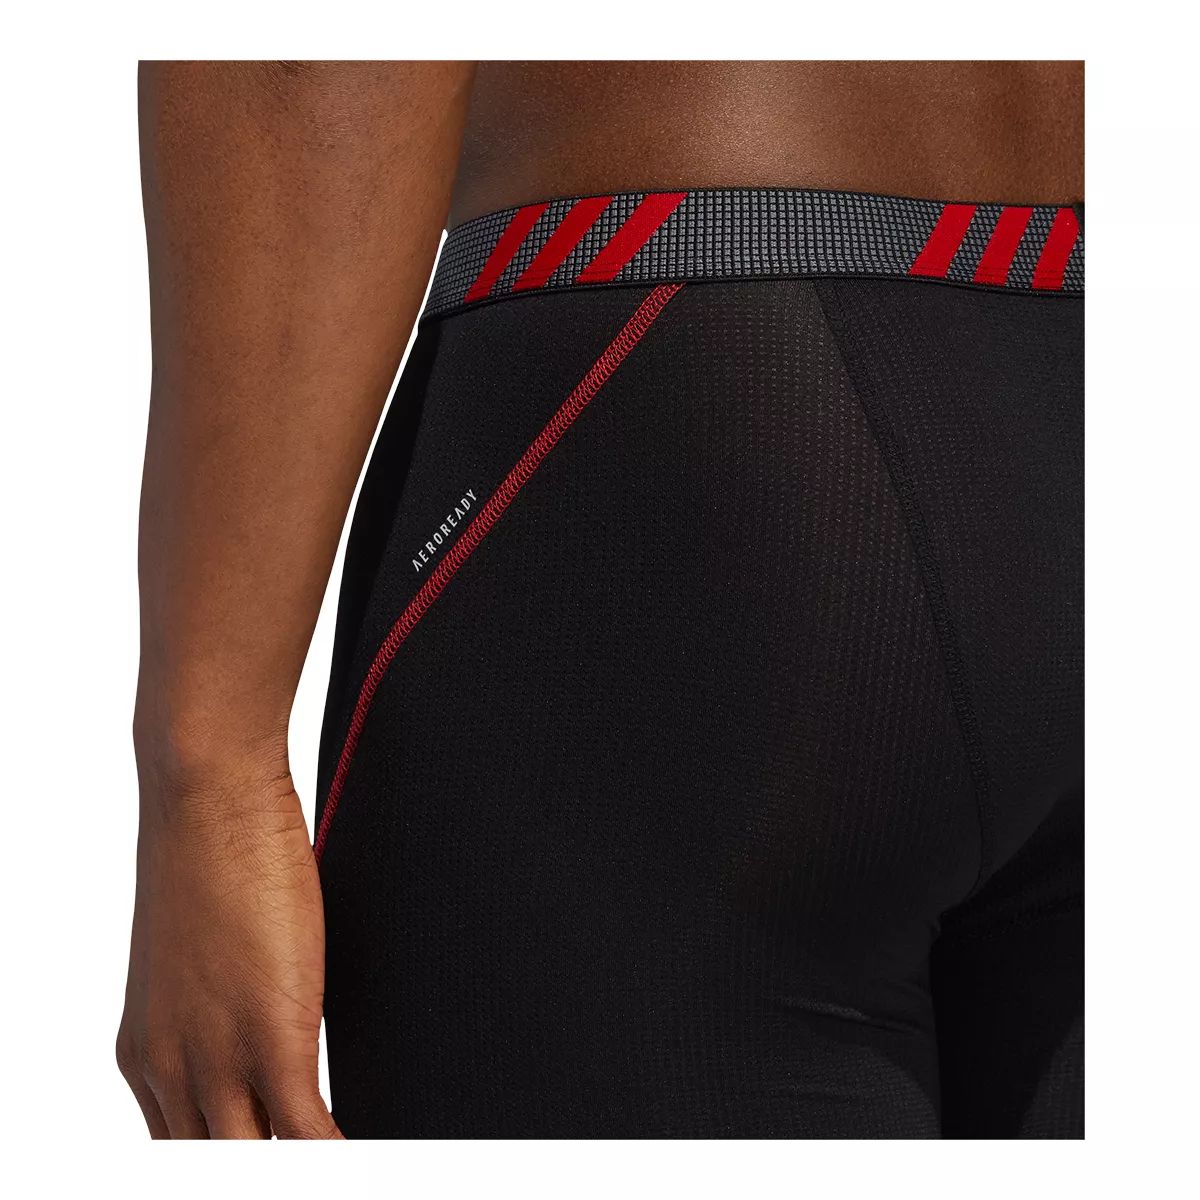 https://media-www.atmosphere.ca/product/div-03-softgoods/dpt-79-clothing-accessories/sdpt-01-mens/333451819/adidas-m-sport-perf-boxer-bri-mazred-s--63254584-580d-4b87-87e6-5064b47907ce-jpgrendition.jpg?imdensity=1&imwidth=1244&impolicy=mZoom